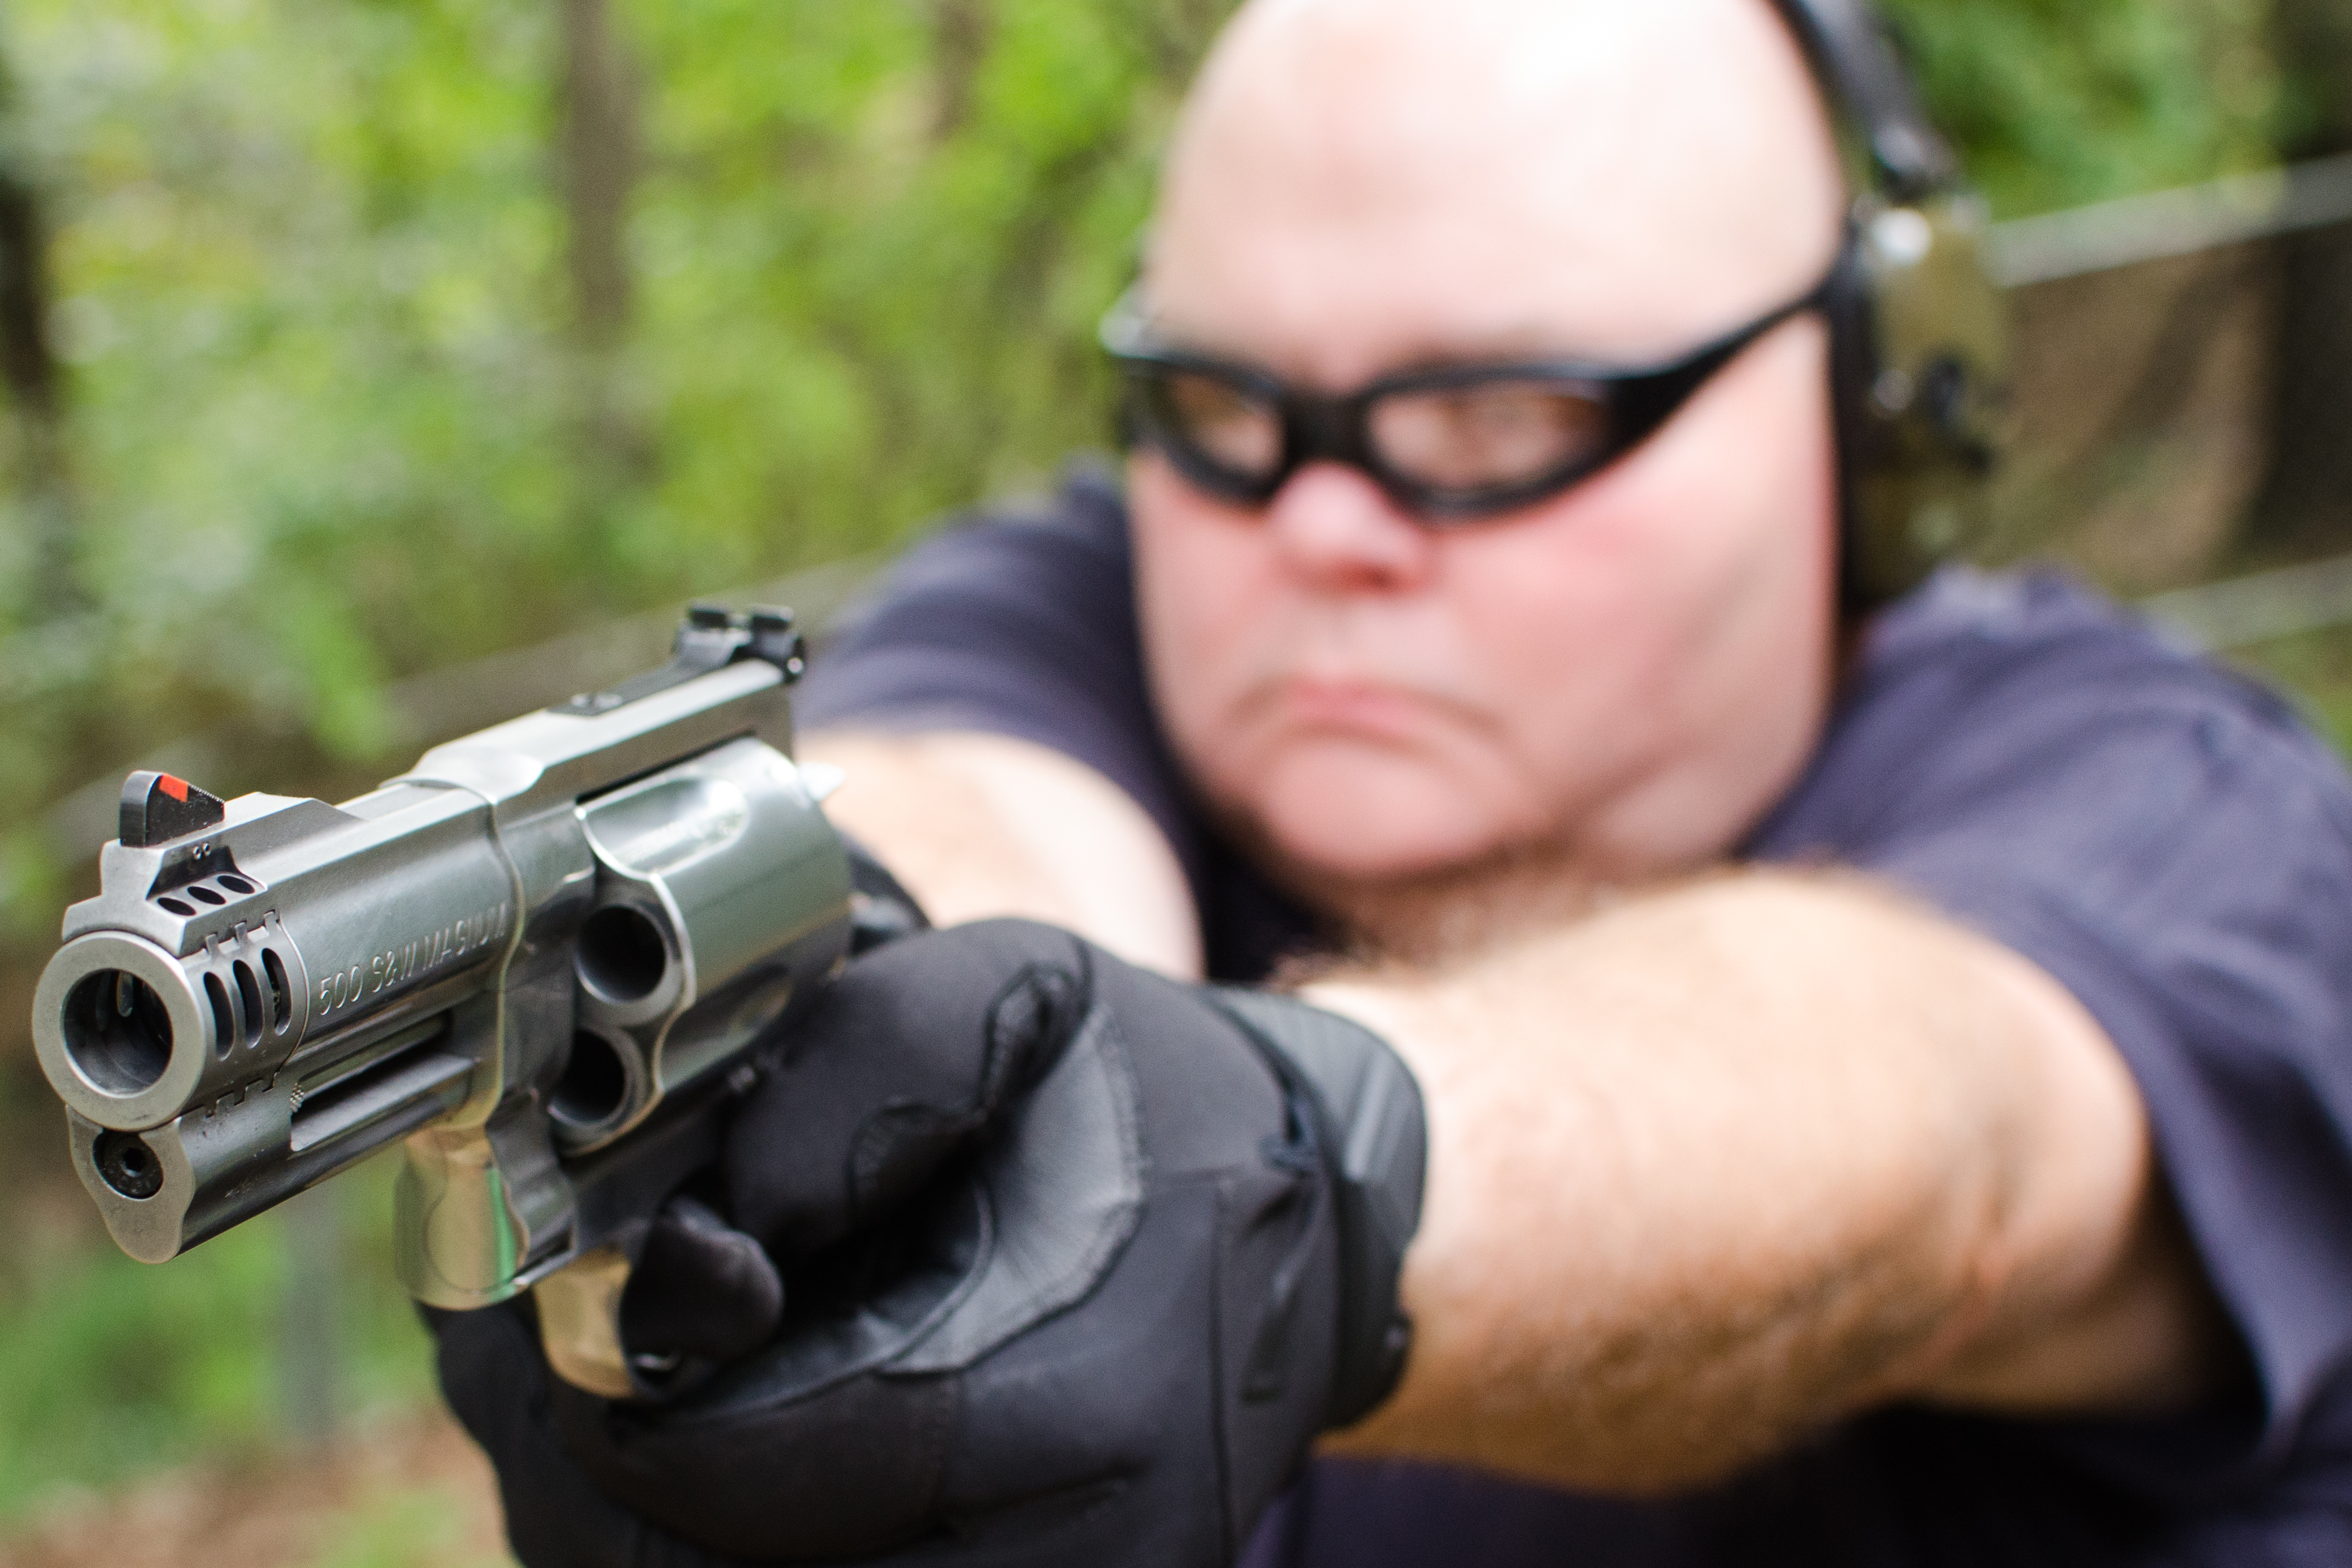 The 4-inch S&W .500 Magnum delivers wrist-wrenching power, but can be a handful to fire.